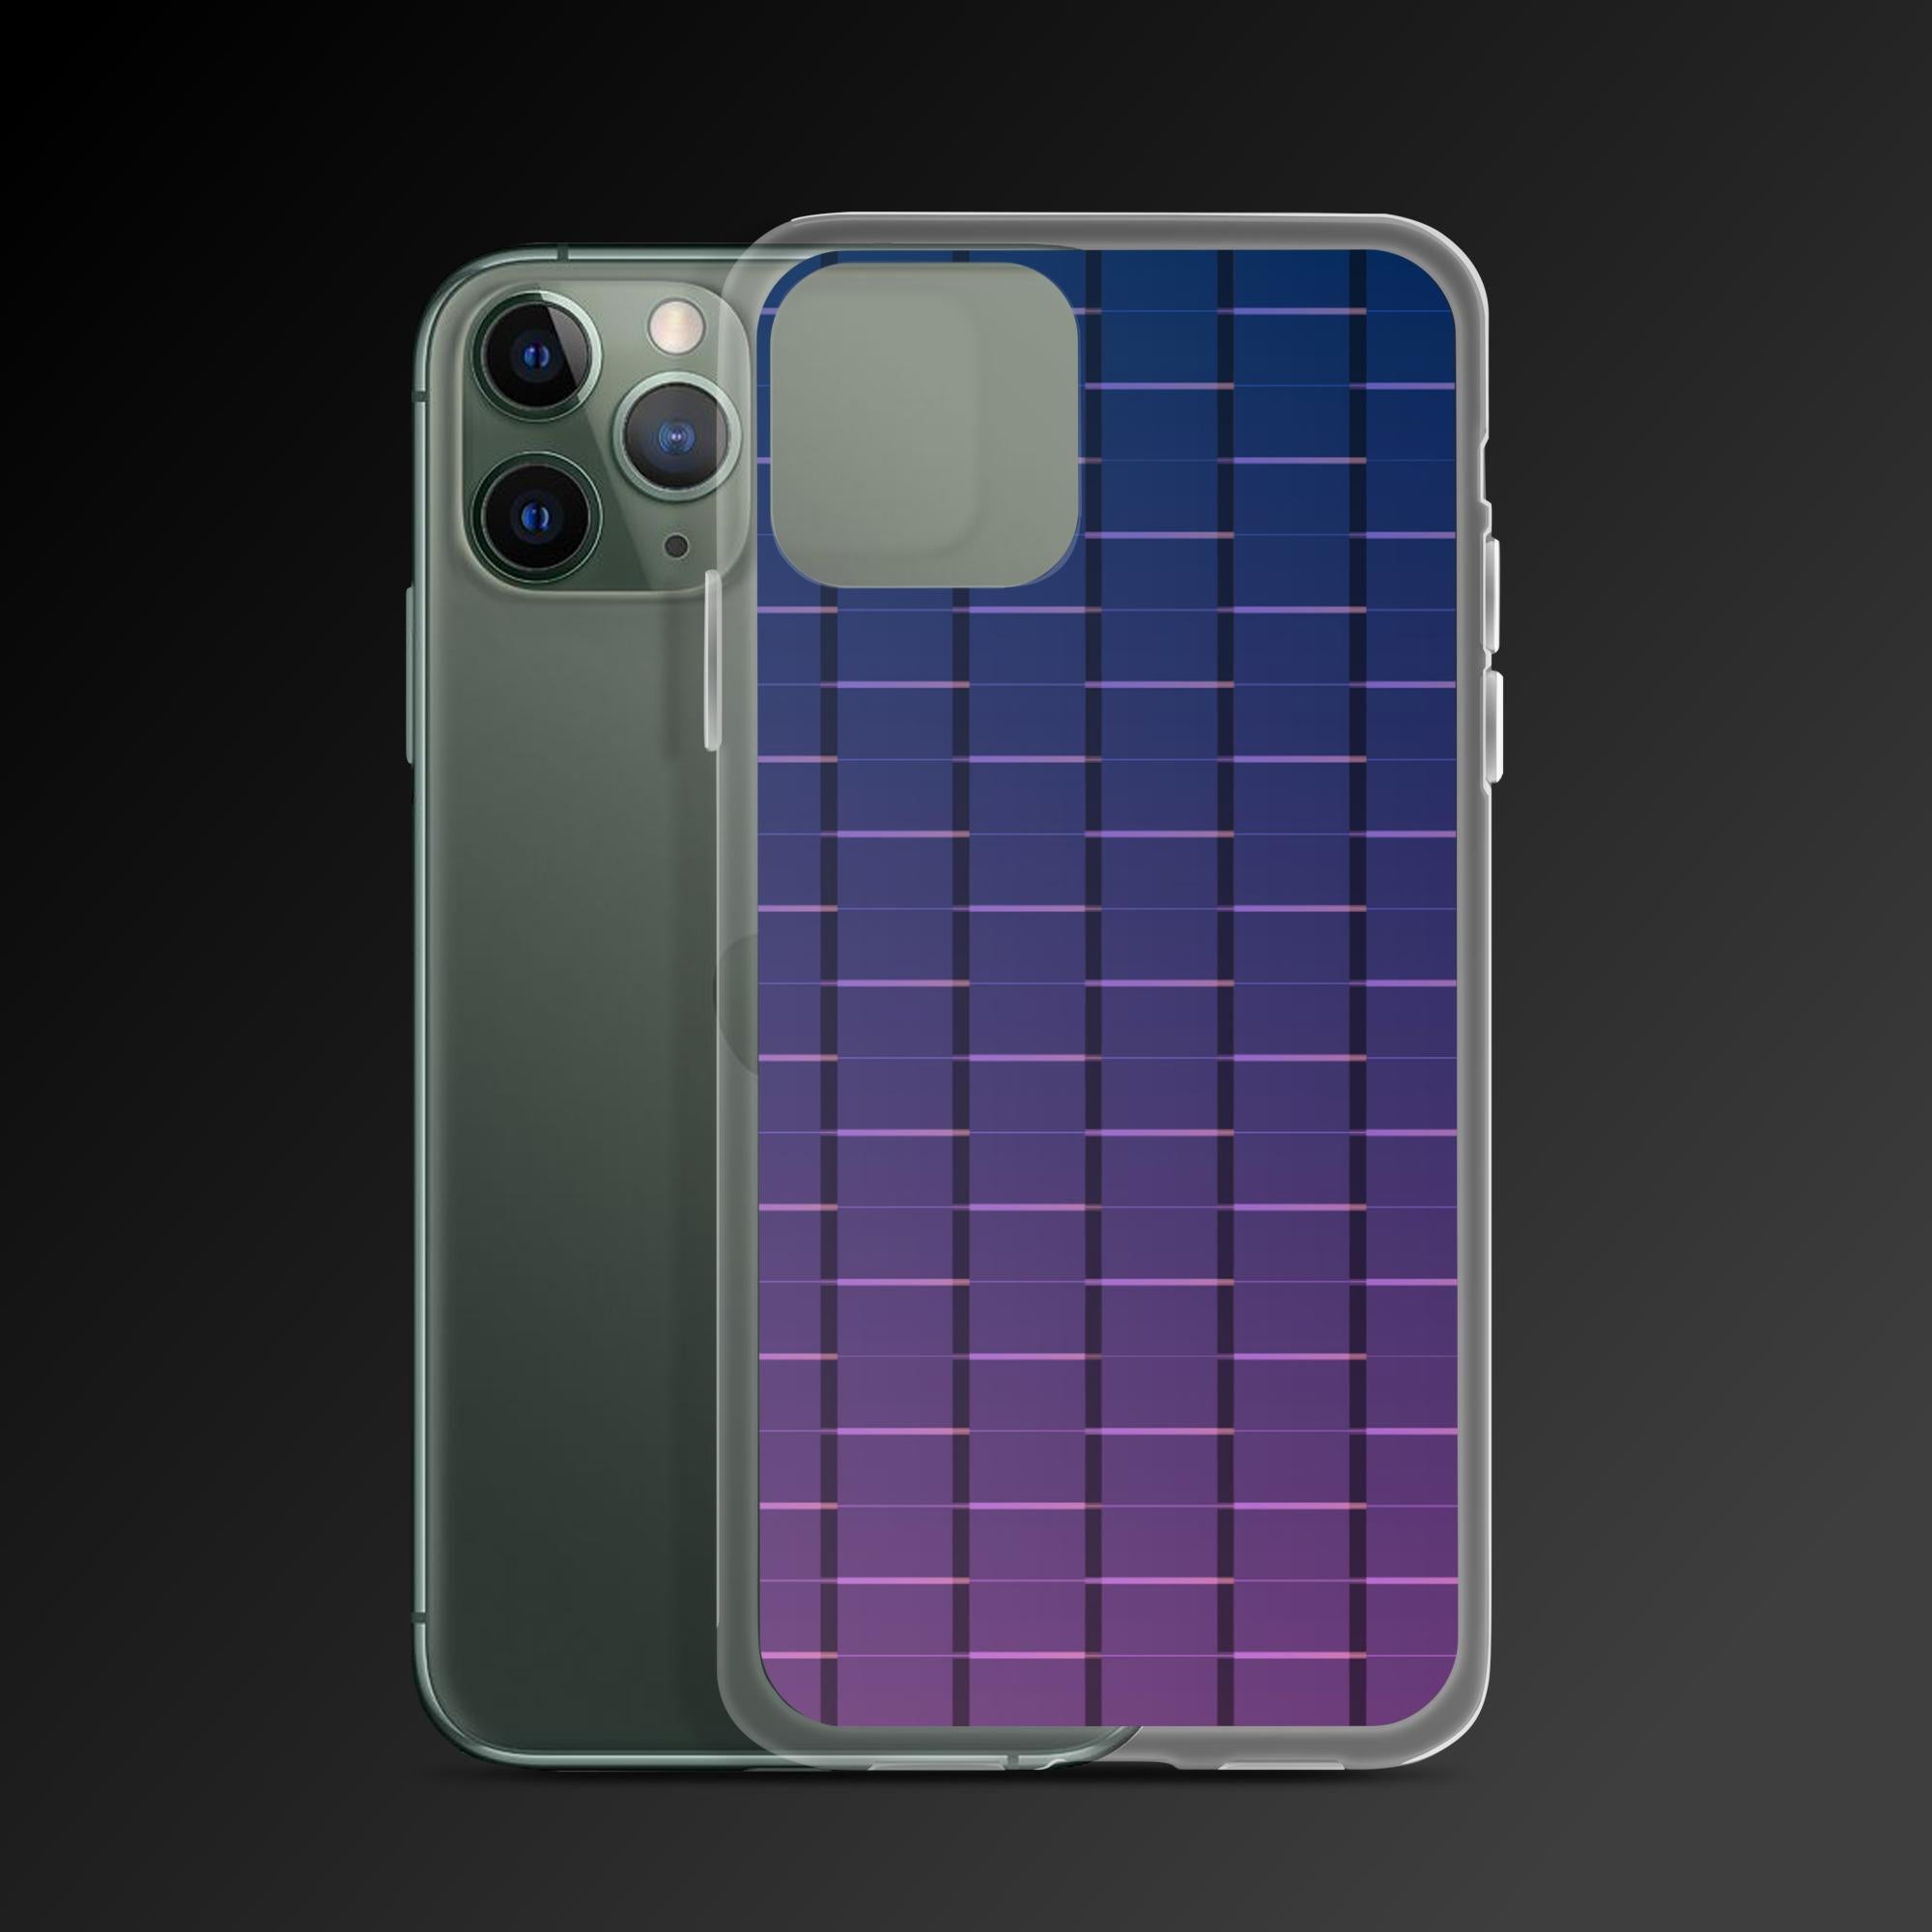 "Strange lines pattern" clear iphone case - Clear iphone case - Ever colorful